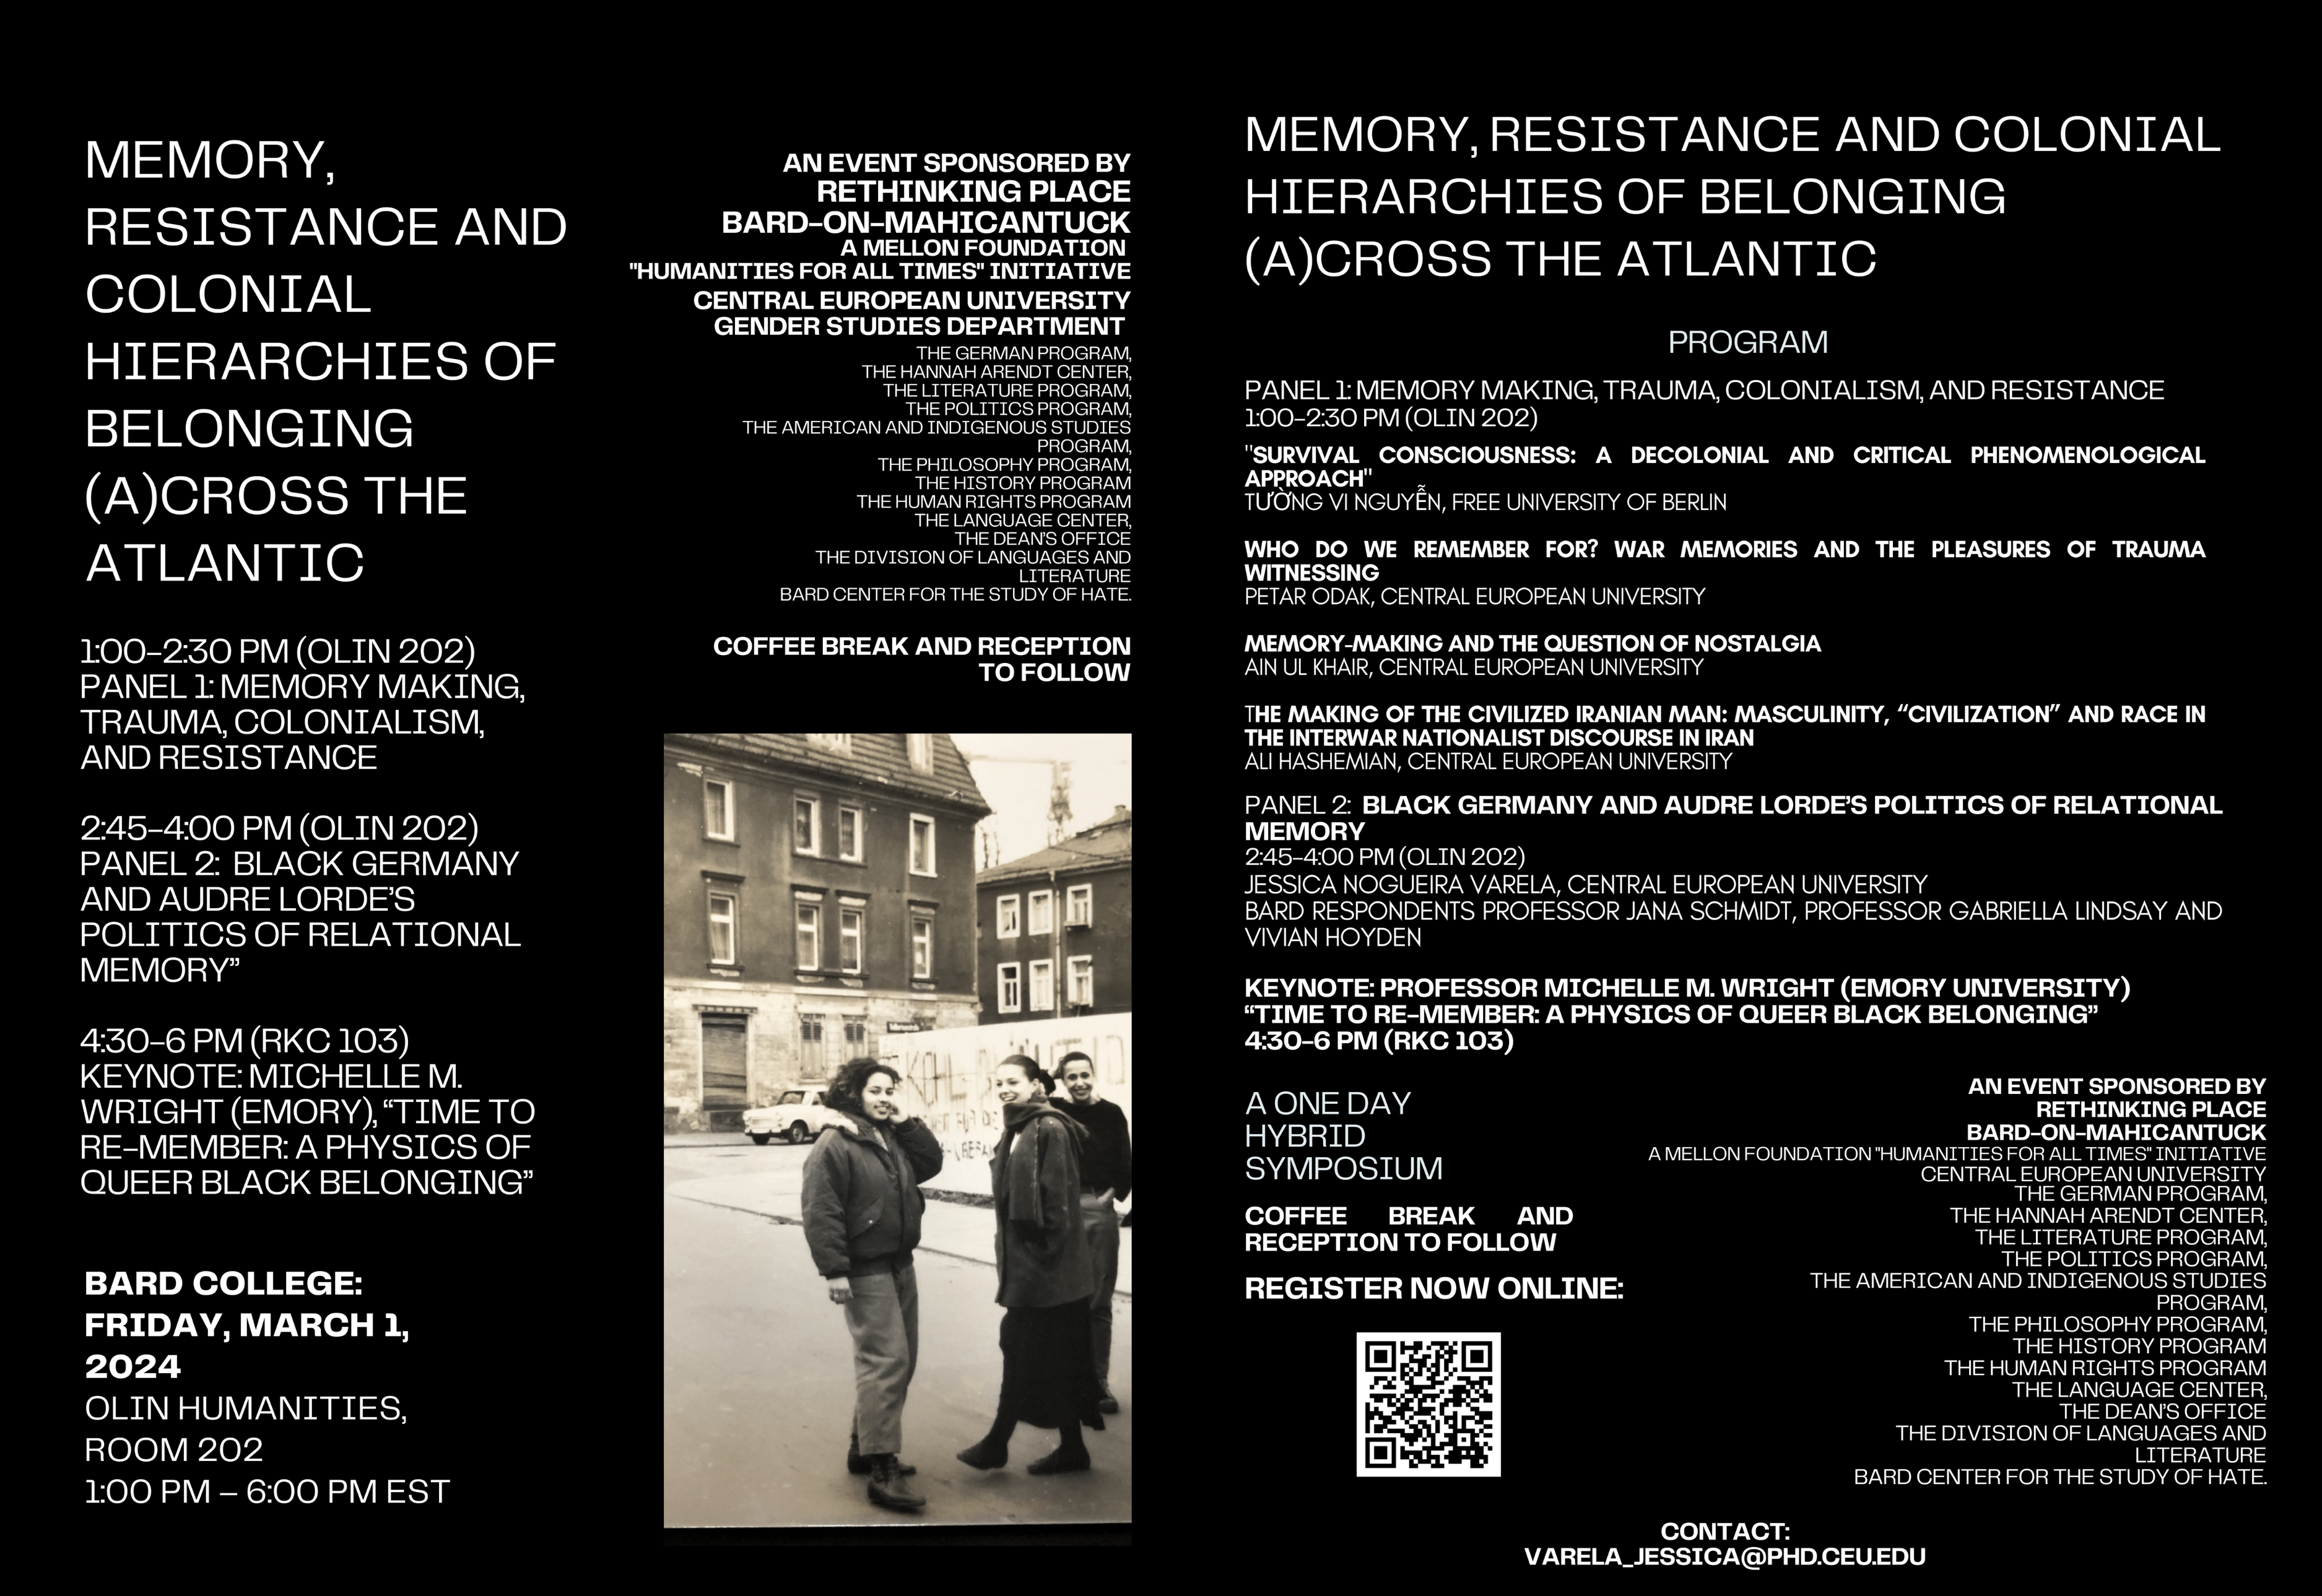 [Memory, Resistance, and Colonial Hierarchies of Belonging (A)cross the Atlantic] Click on the image to see the full schedule and RSVP!